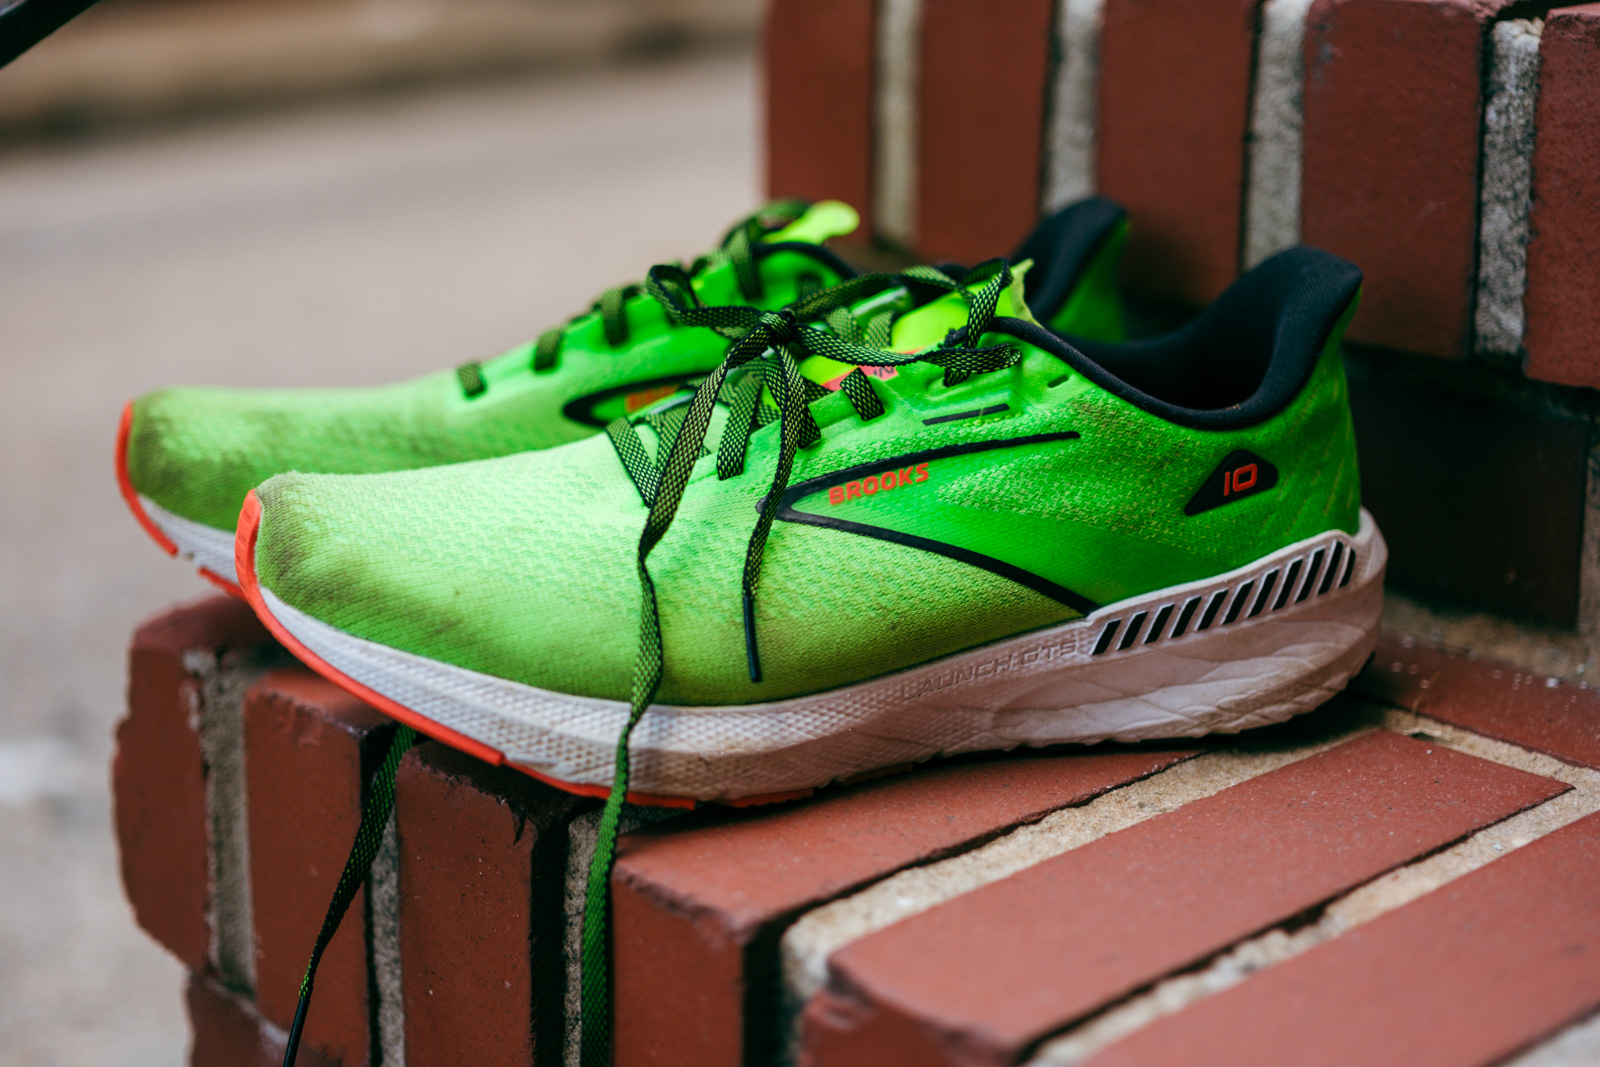 BROOKS LAUNCH 10 REVIEW: The Best Running Shoes For $110, Period